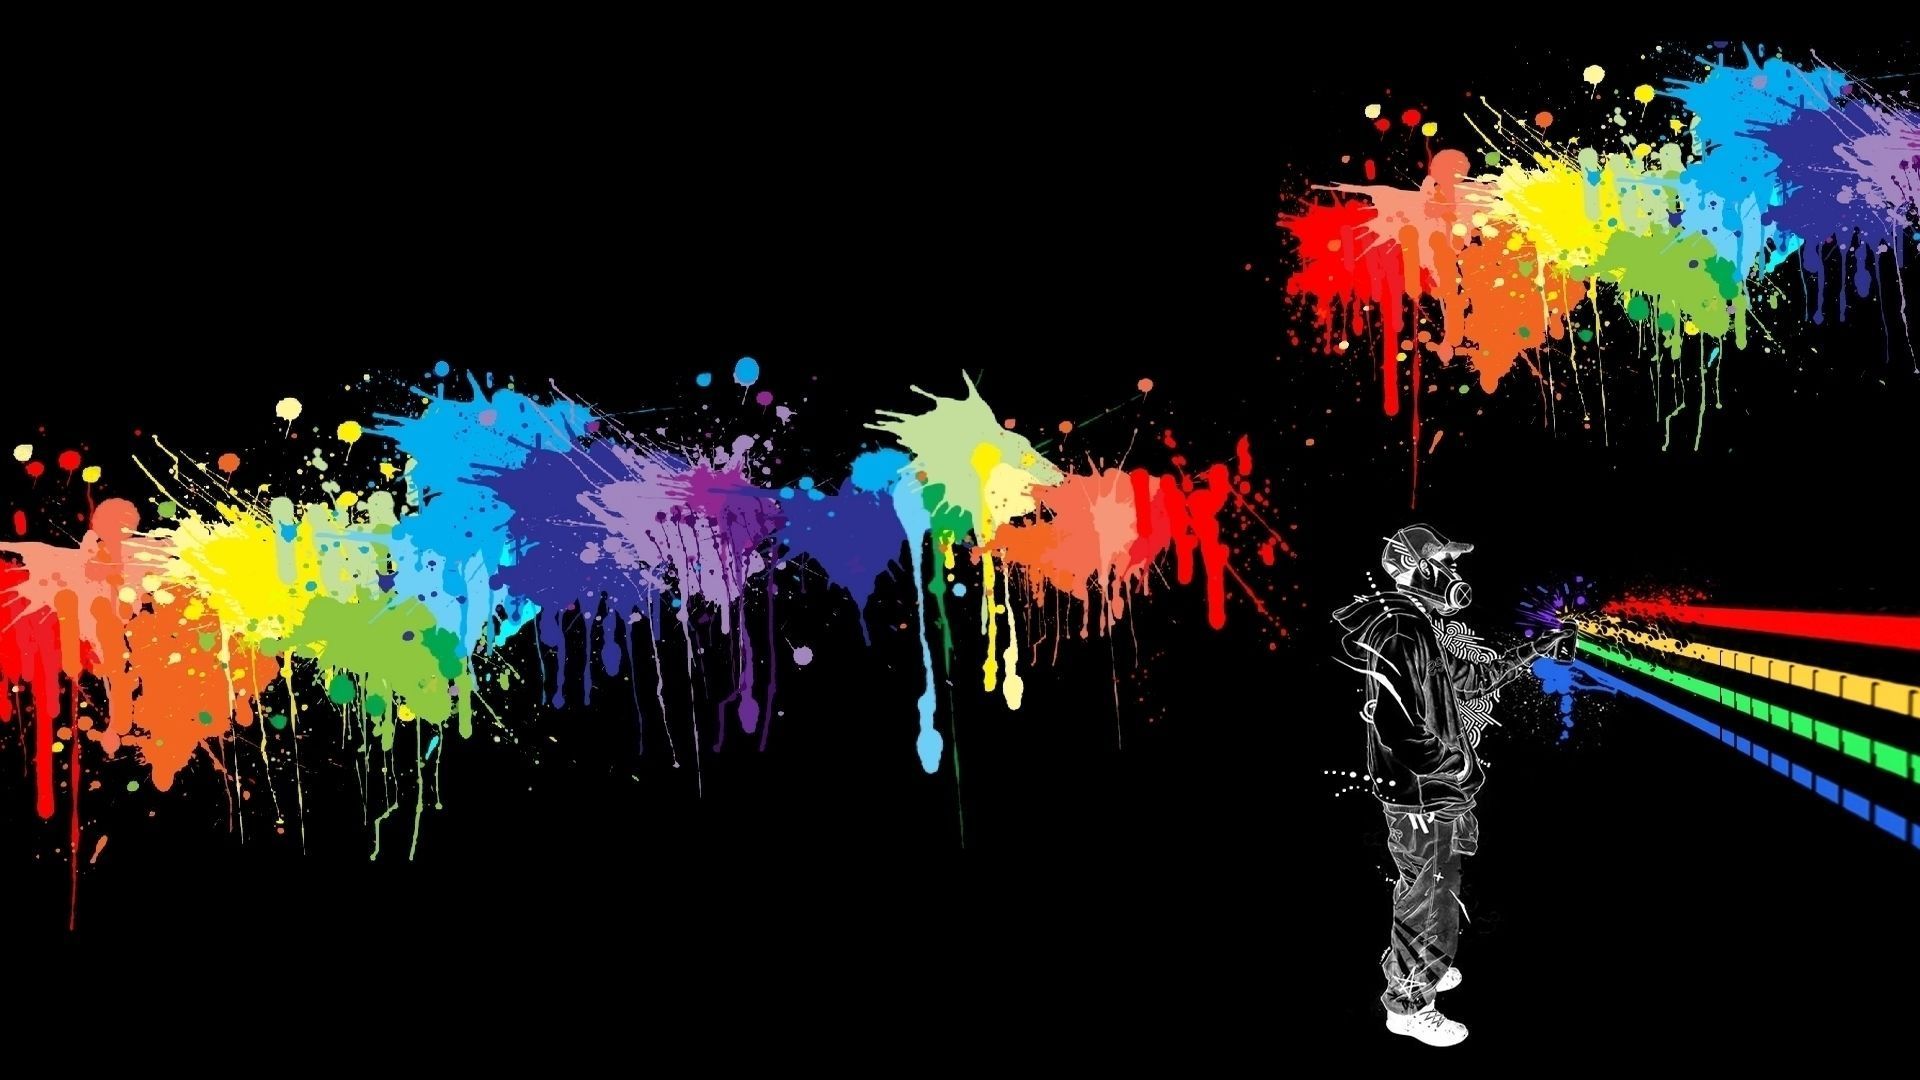 Abstract-cool-graffiti-wallpaper-with-splach-paint-color-street-art-background-hd.jpg